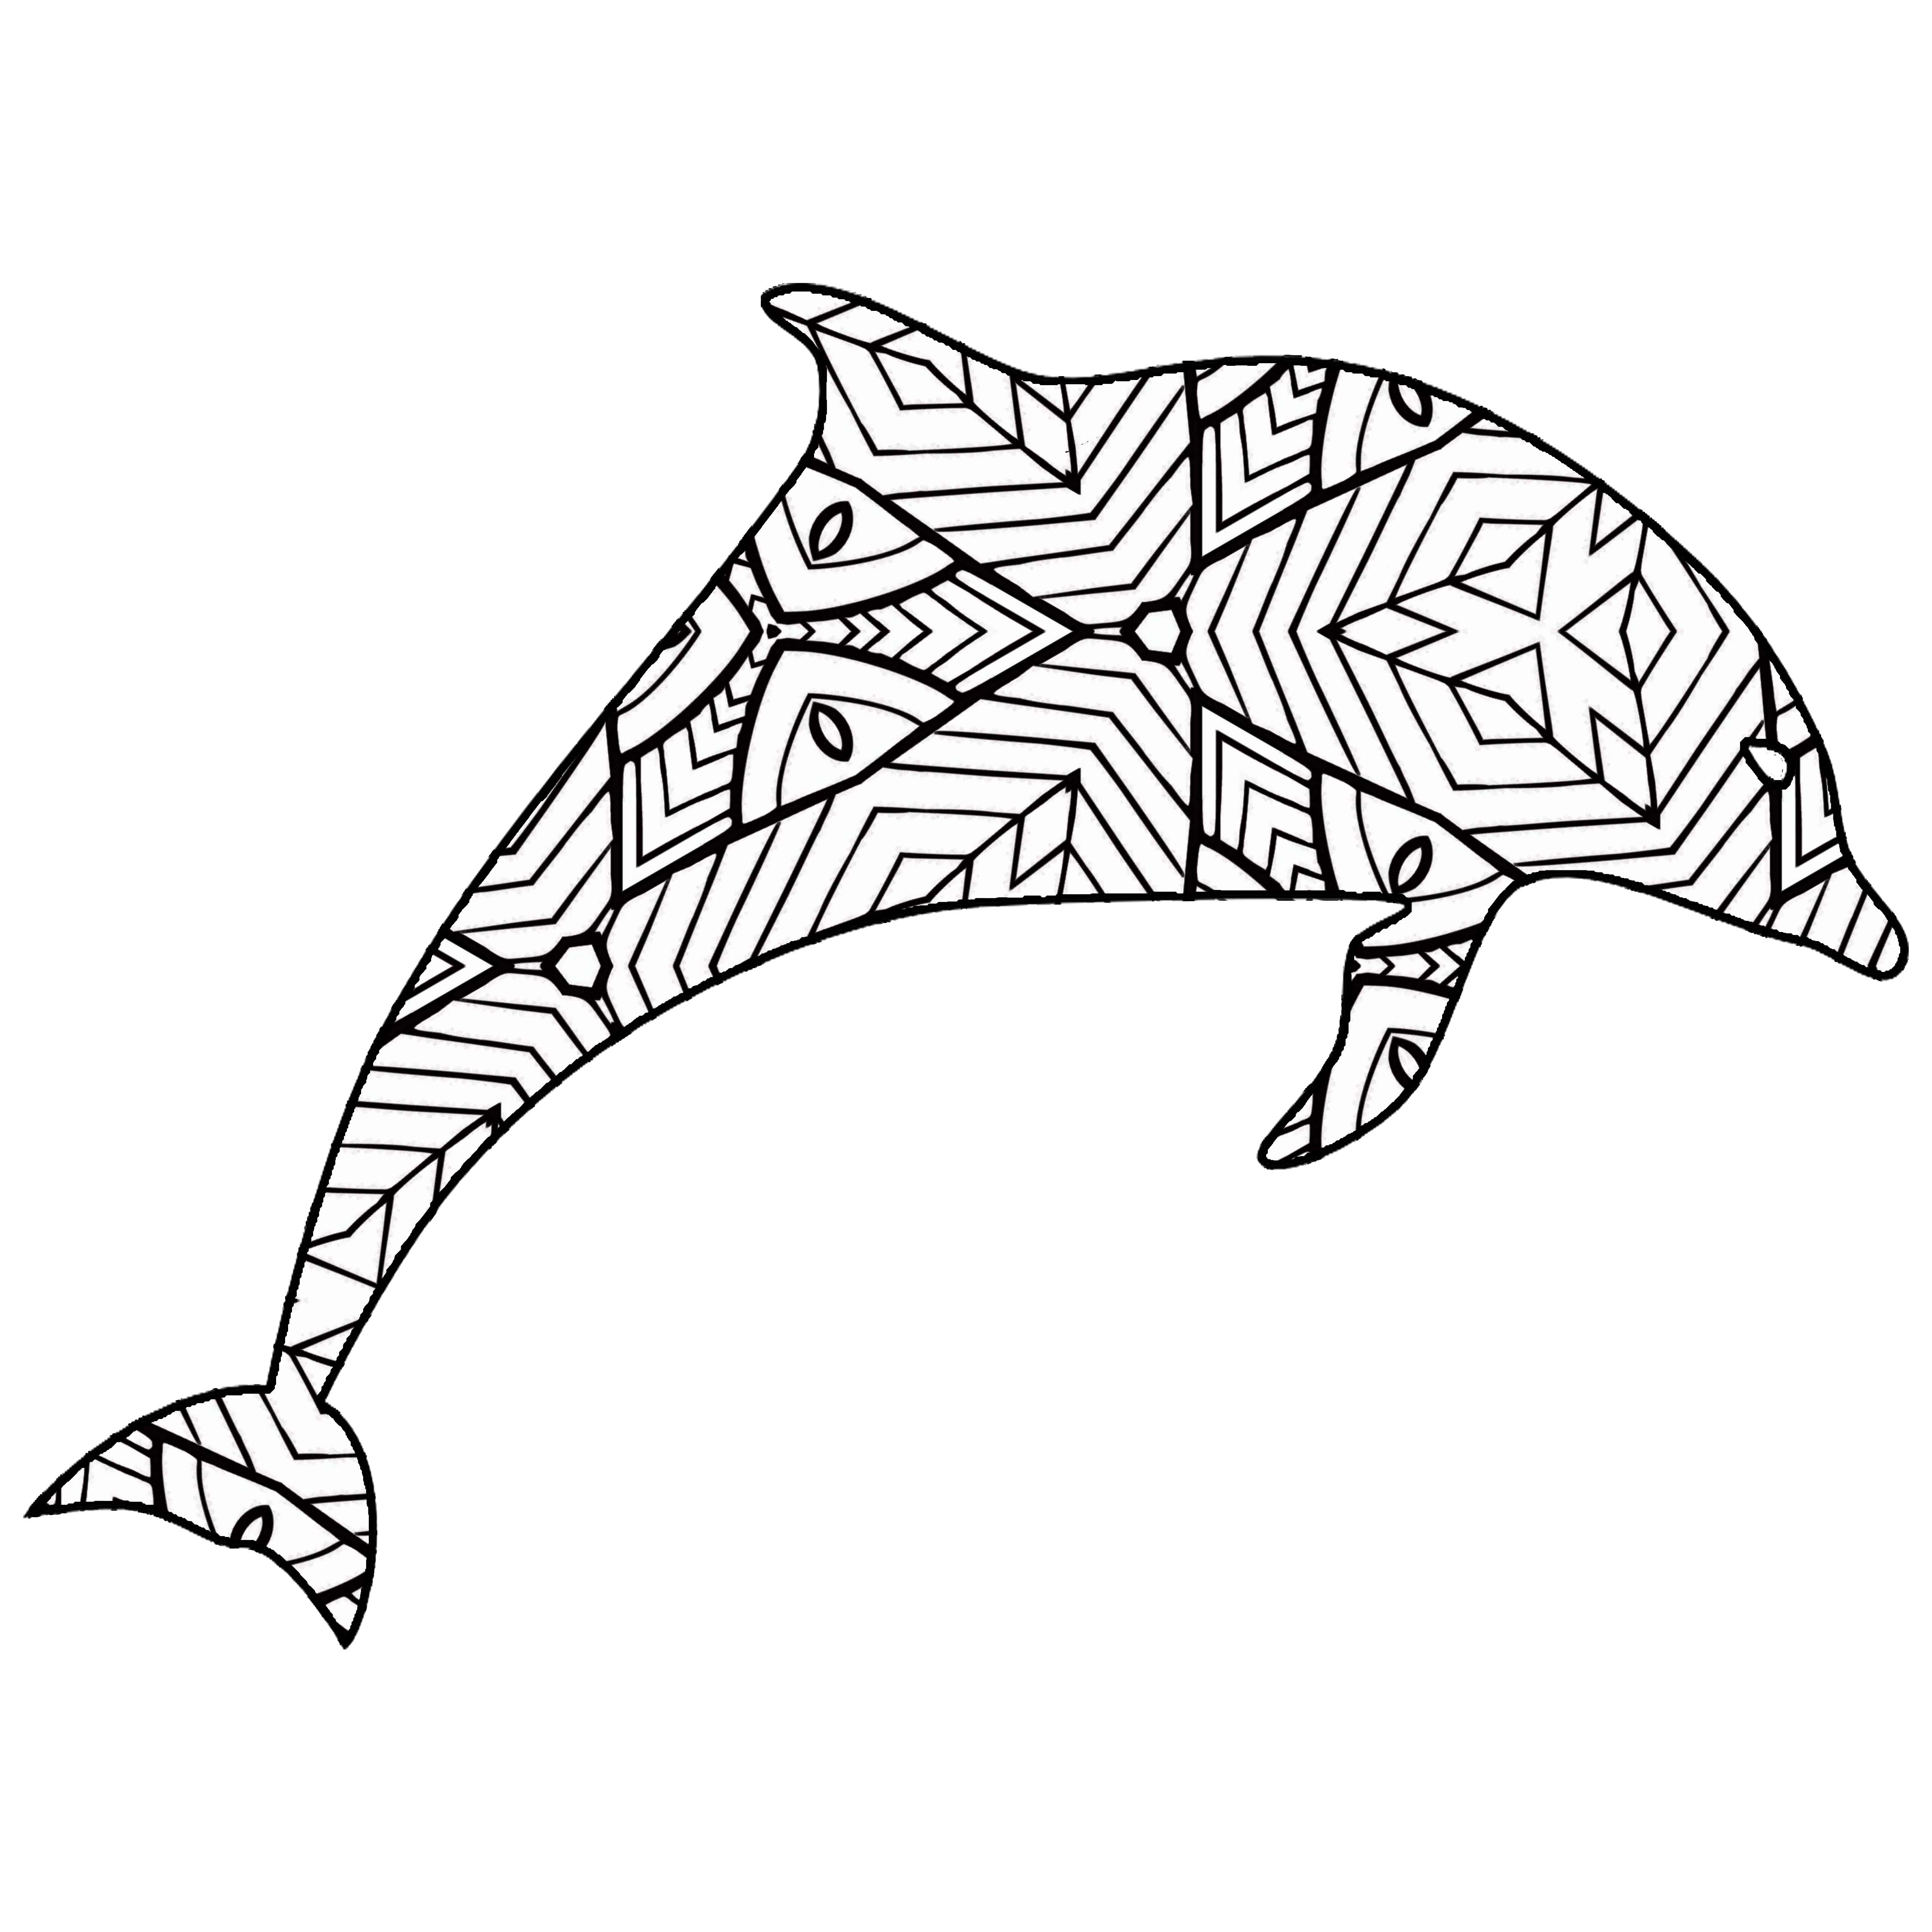 Download 30 Free Printable Geometric Animal Coloring Pages | The Cottage Market